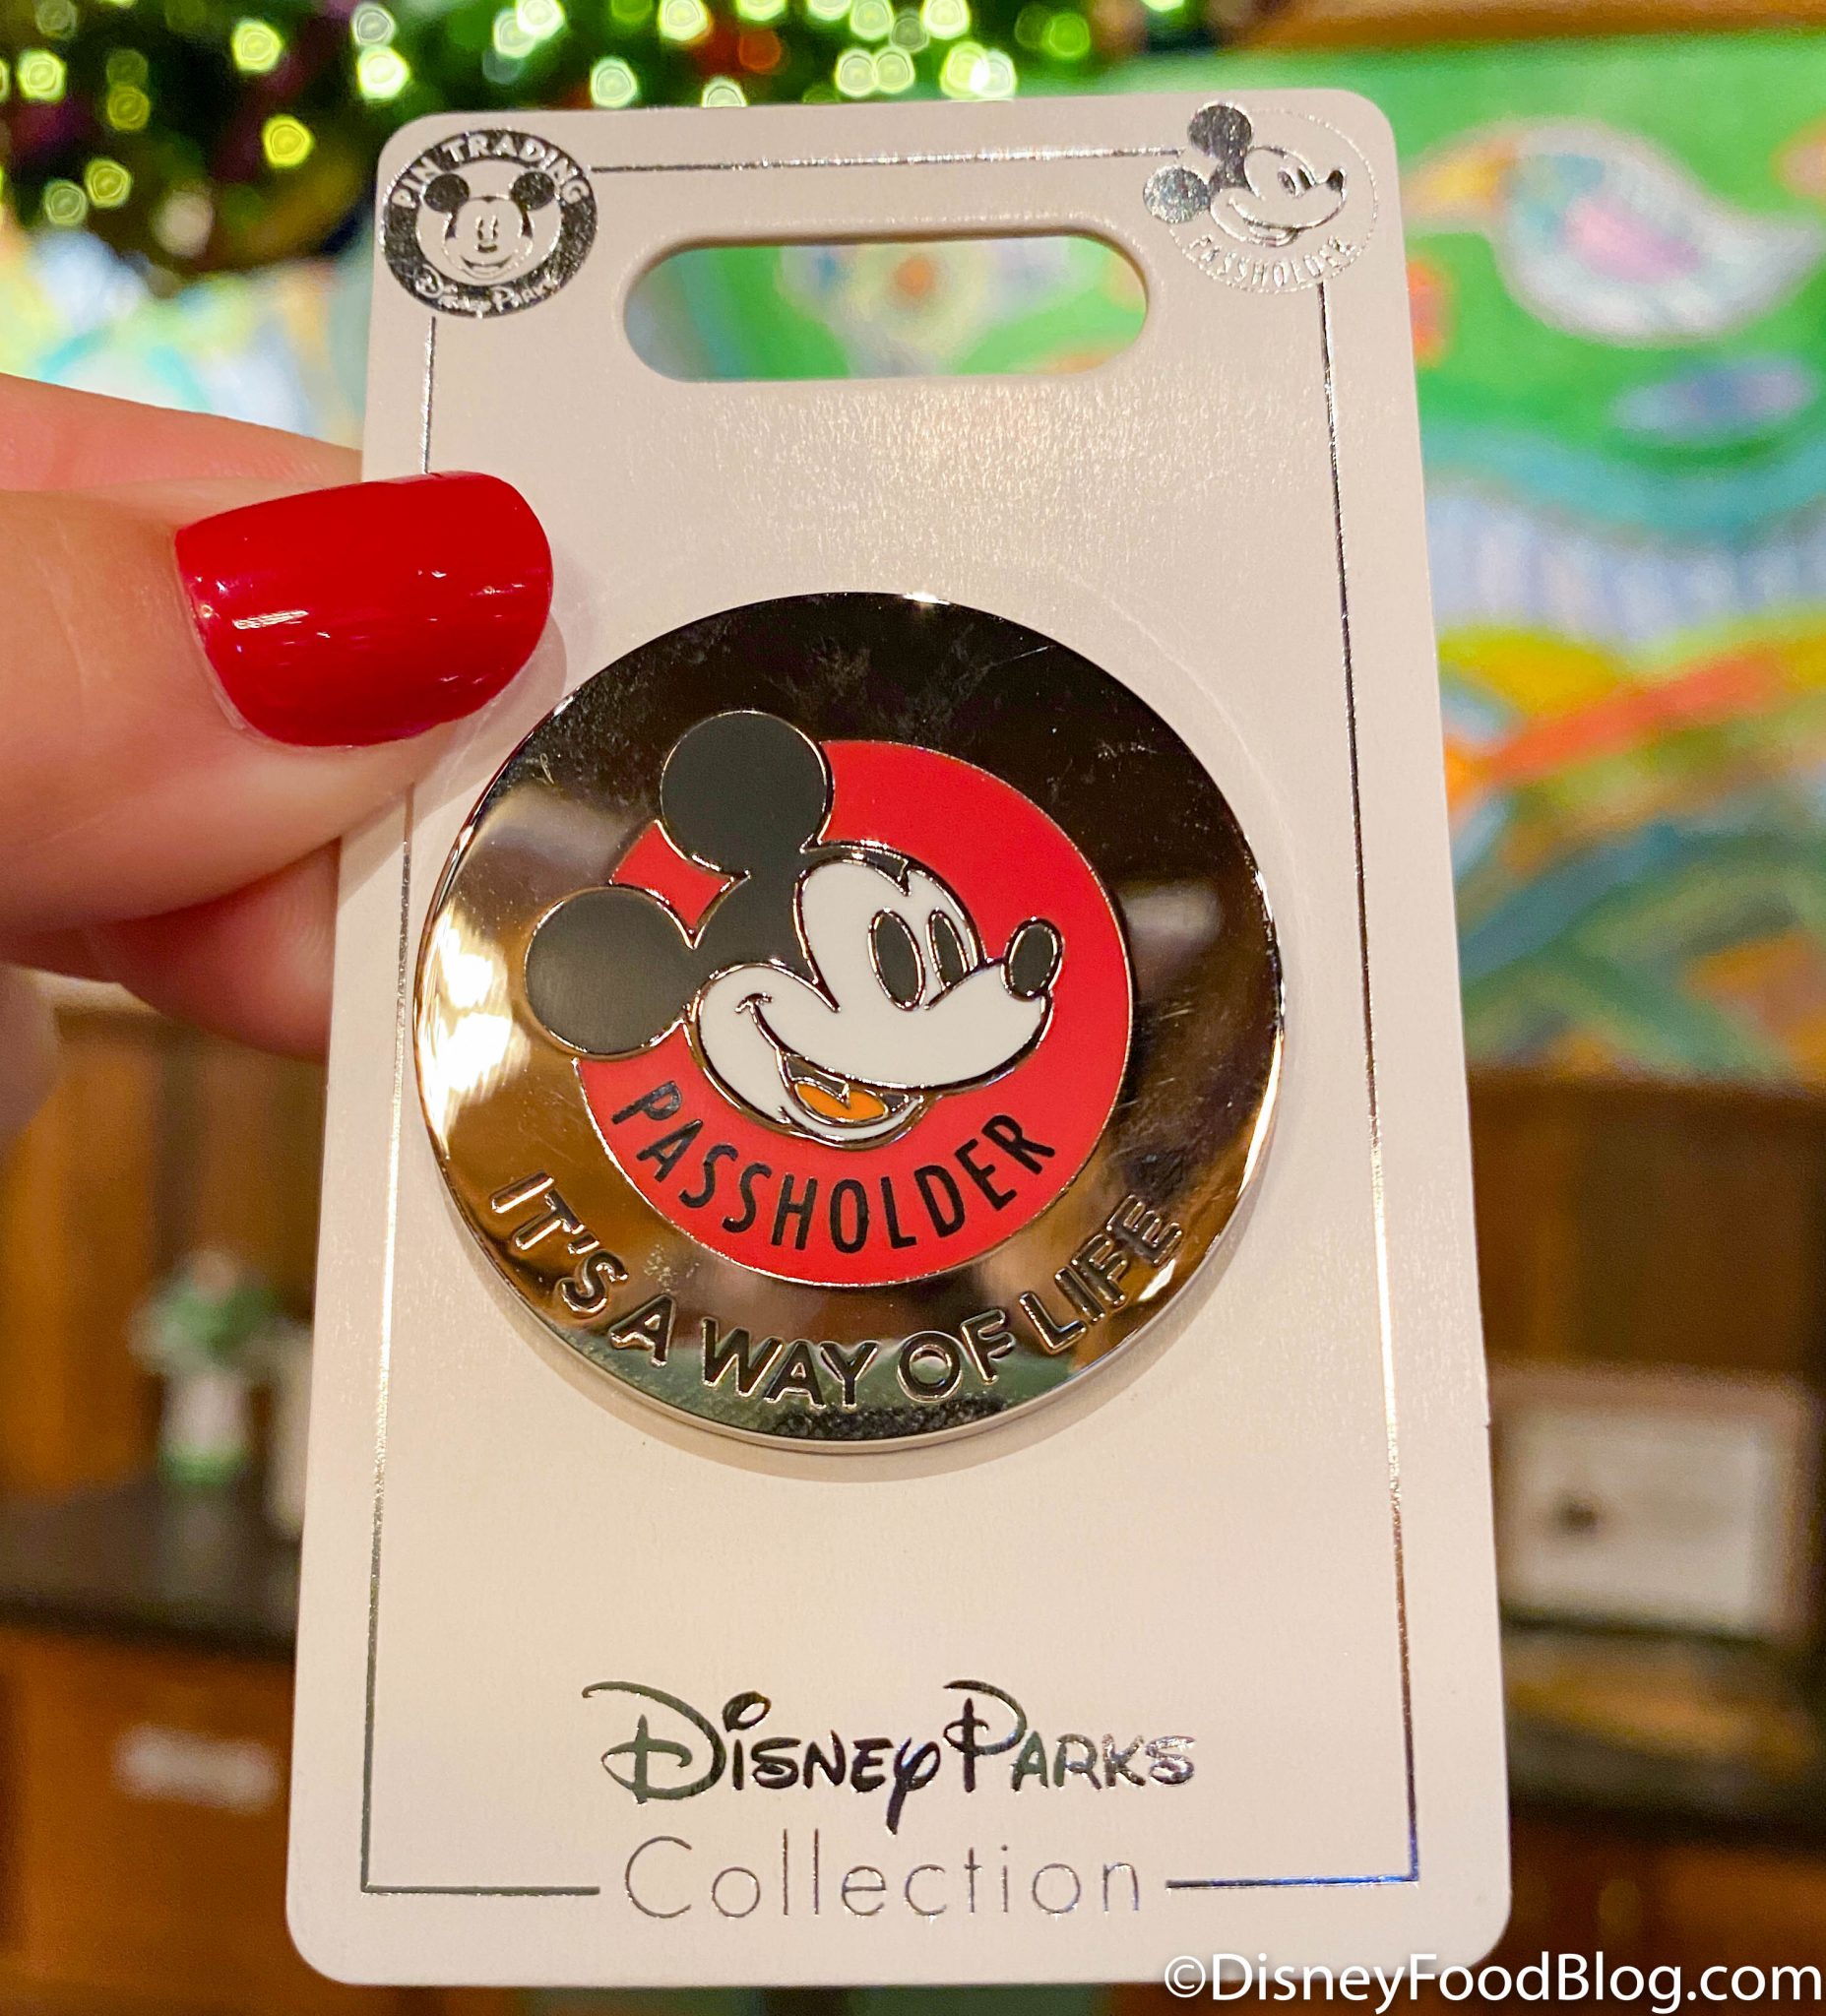 Annual Passholders Can Score Some NEW Exclusive Merchandise in Disney